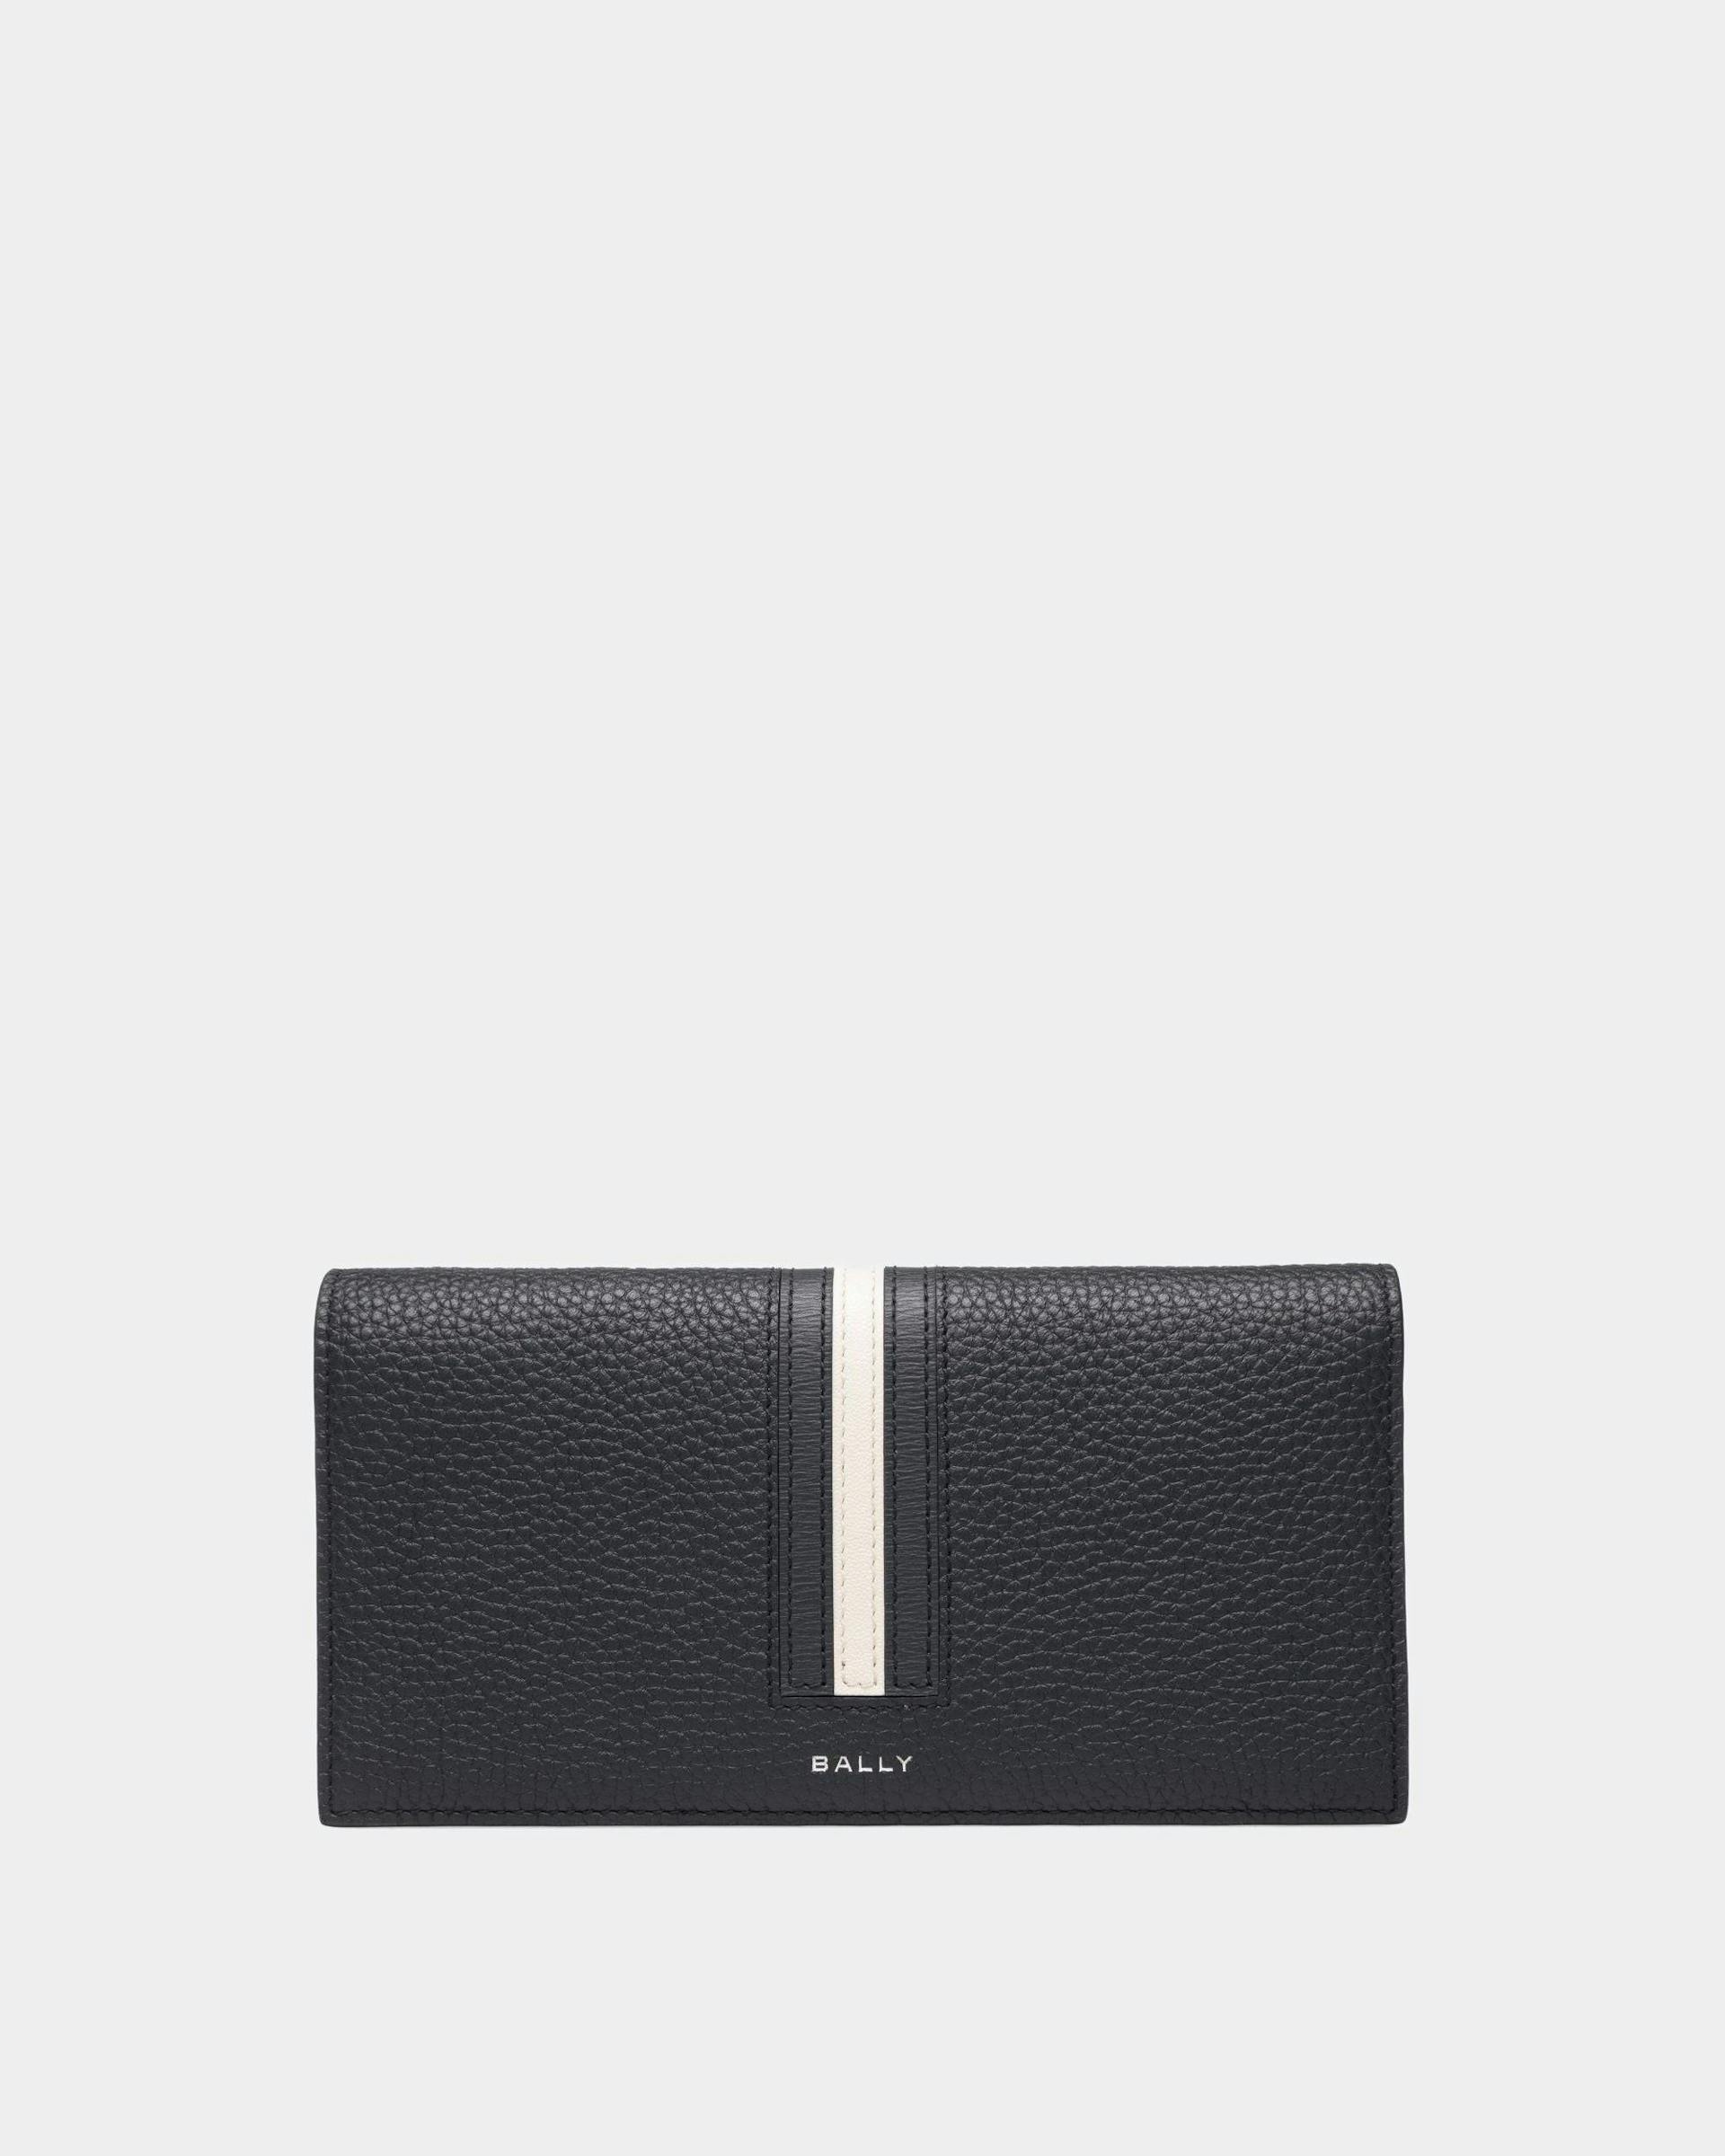 Men's Ribbon Continental Wallet In Midnight Leather | Bally | Still Life Front